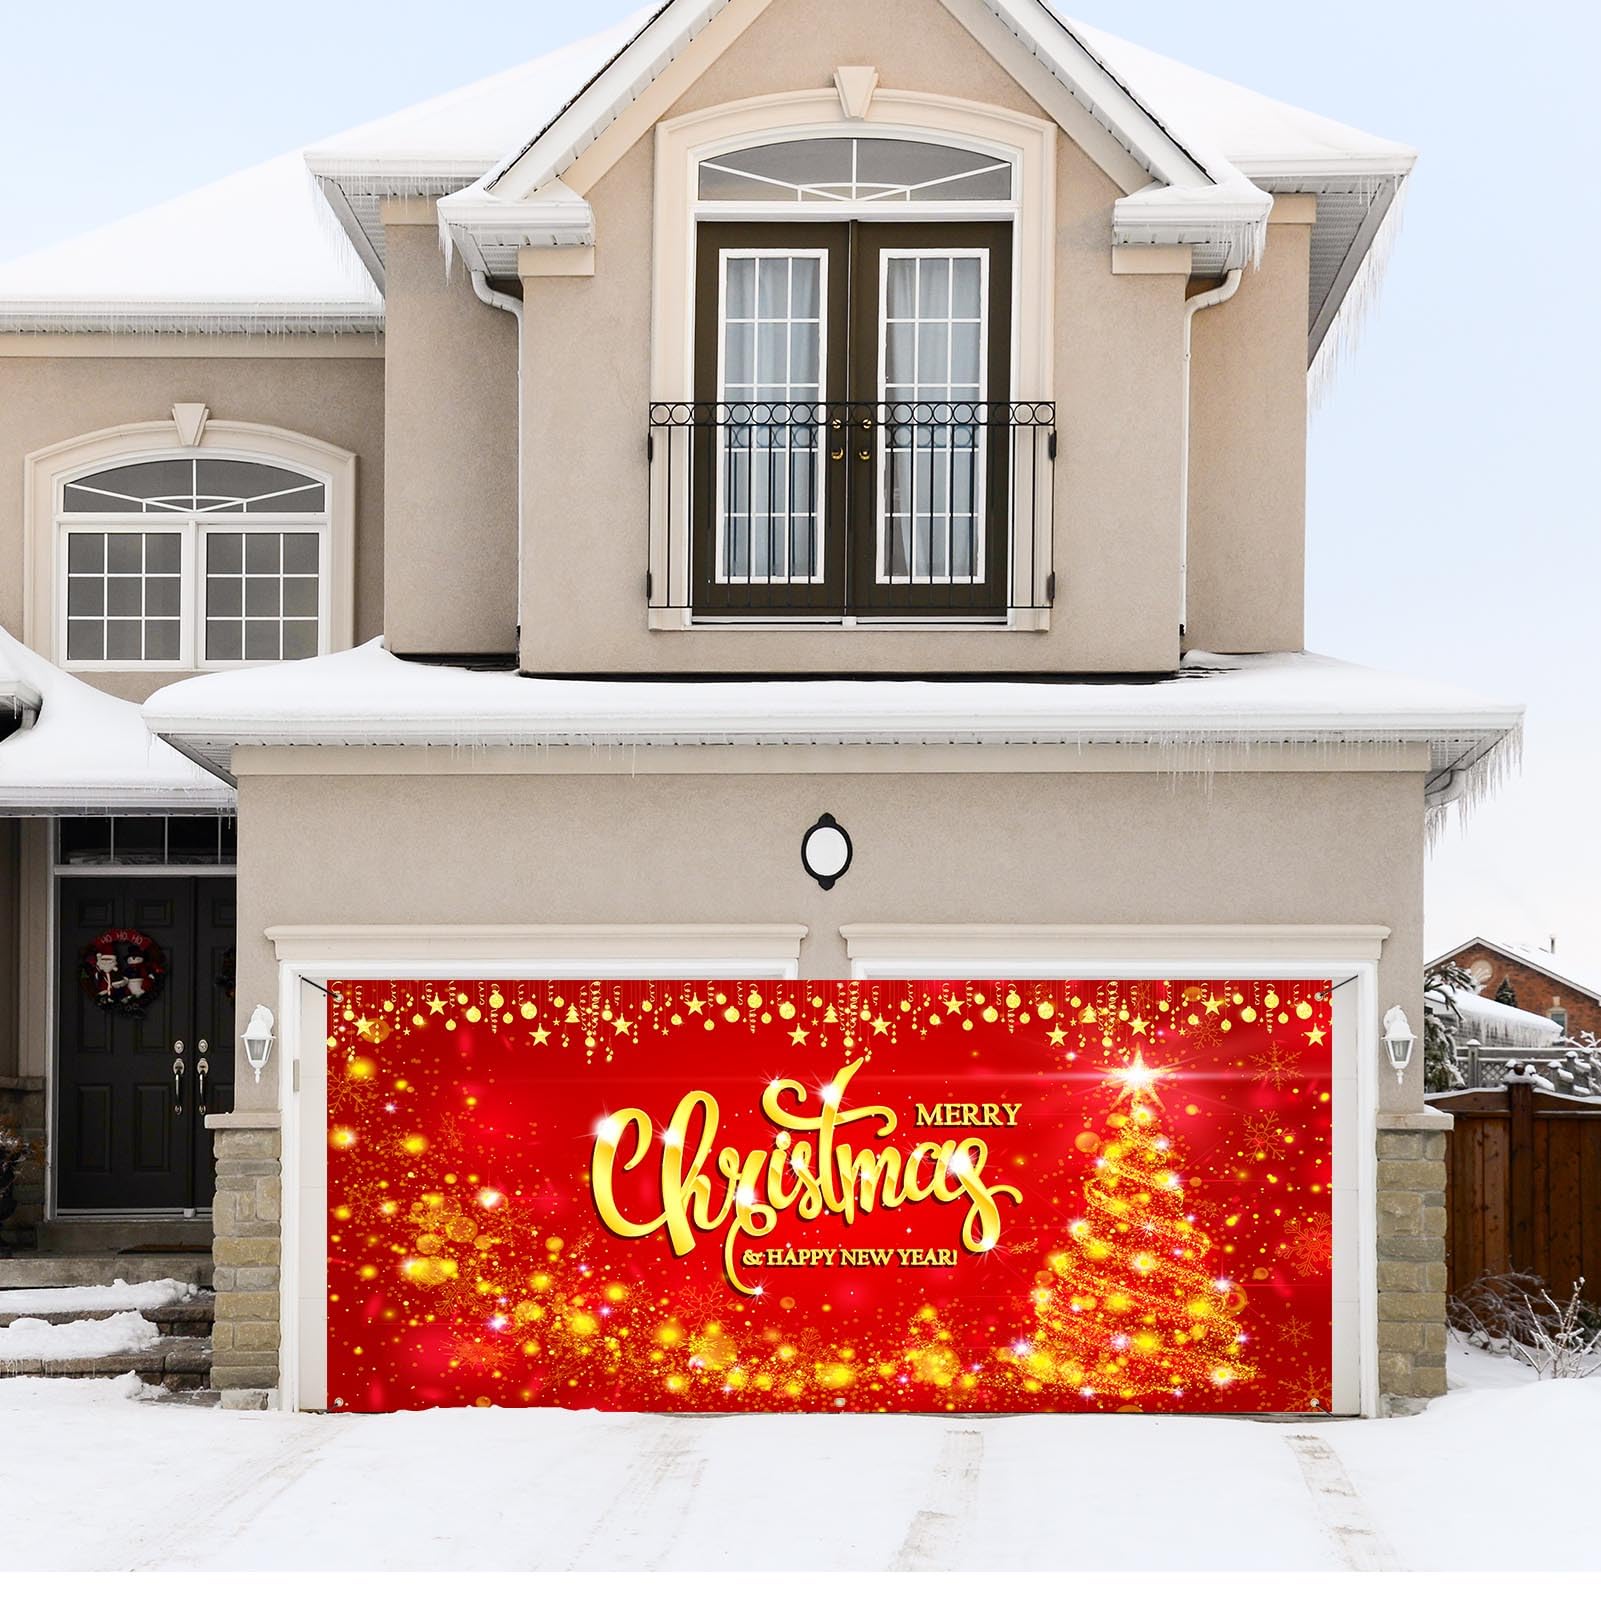 Trgowaul Christmas Garage Door Cover Banner Decoration with Light Large Red Xmas Garage Door Mural Christmas Tree Photography Background Party Supply Happy New Year Garage Door Christmas Decor7x16ft